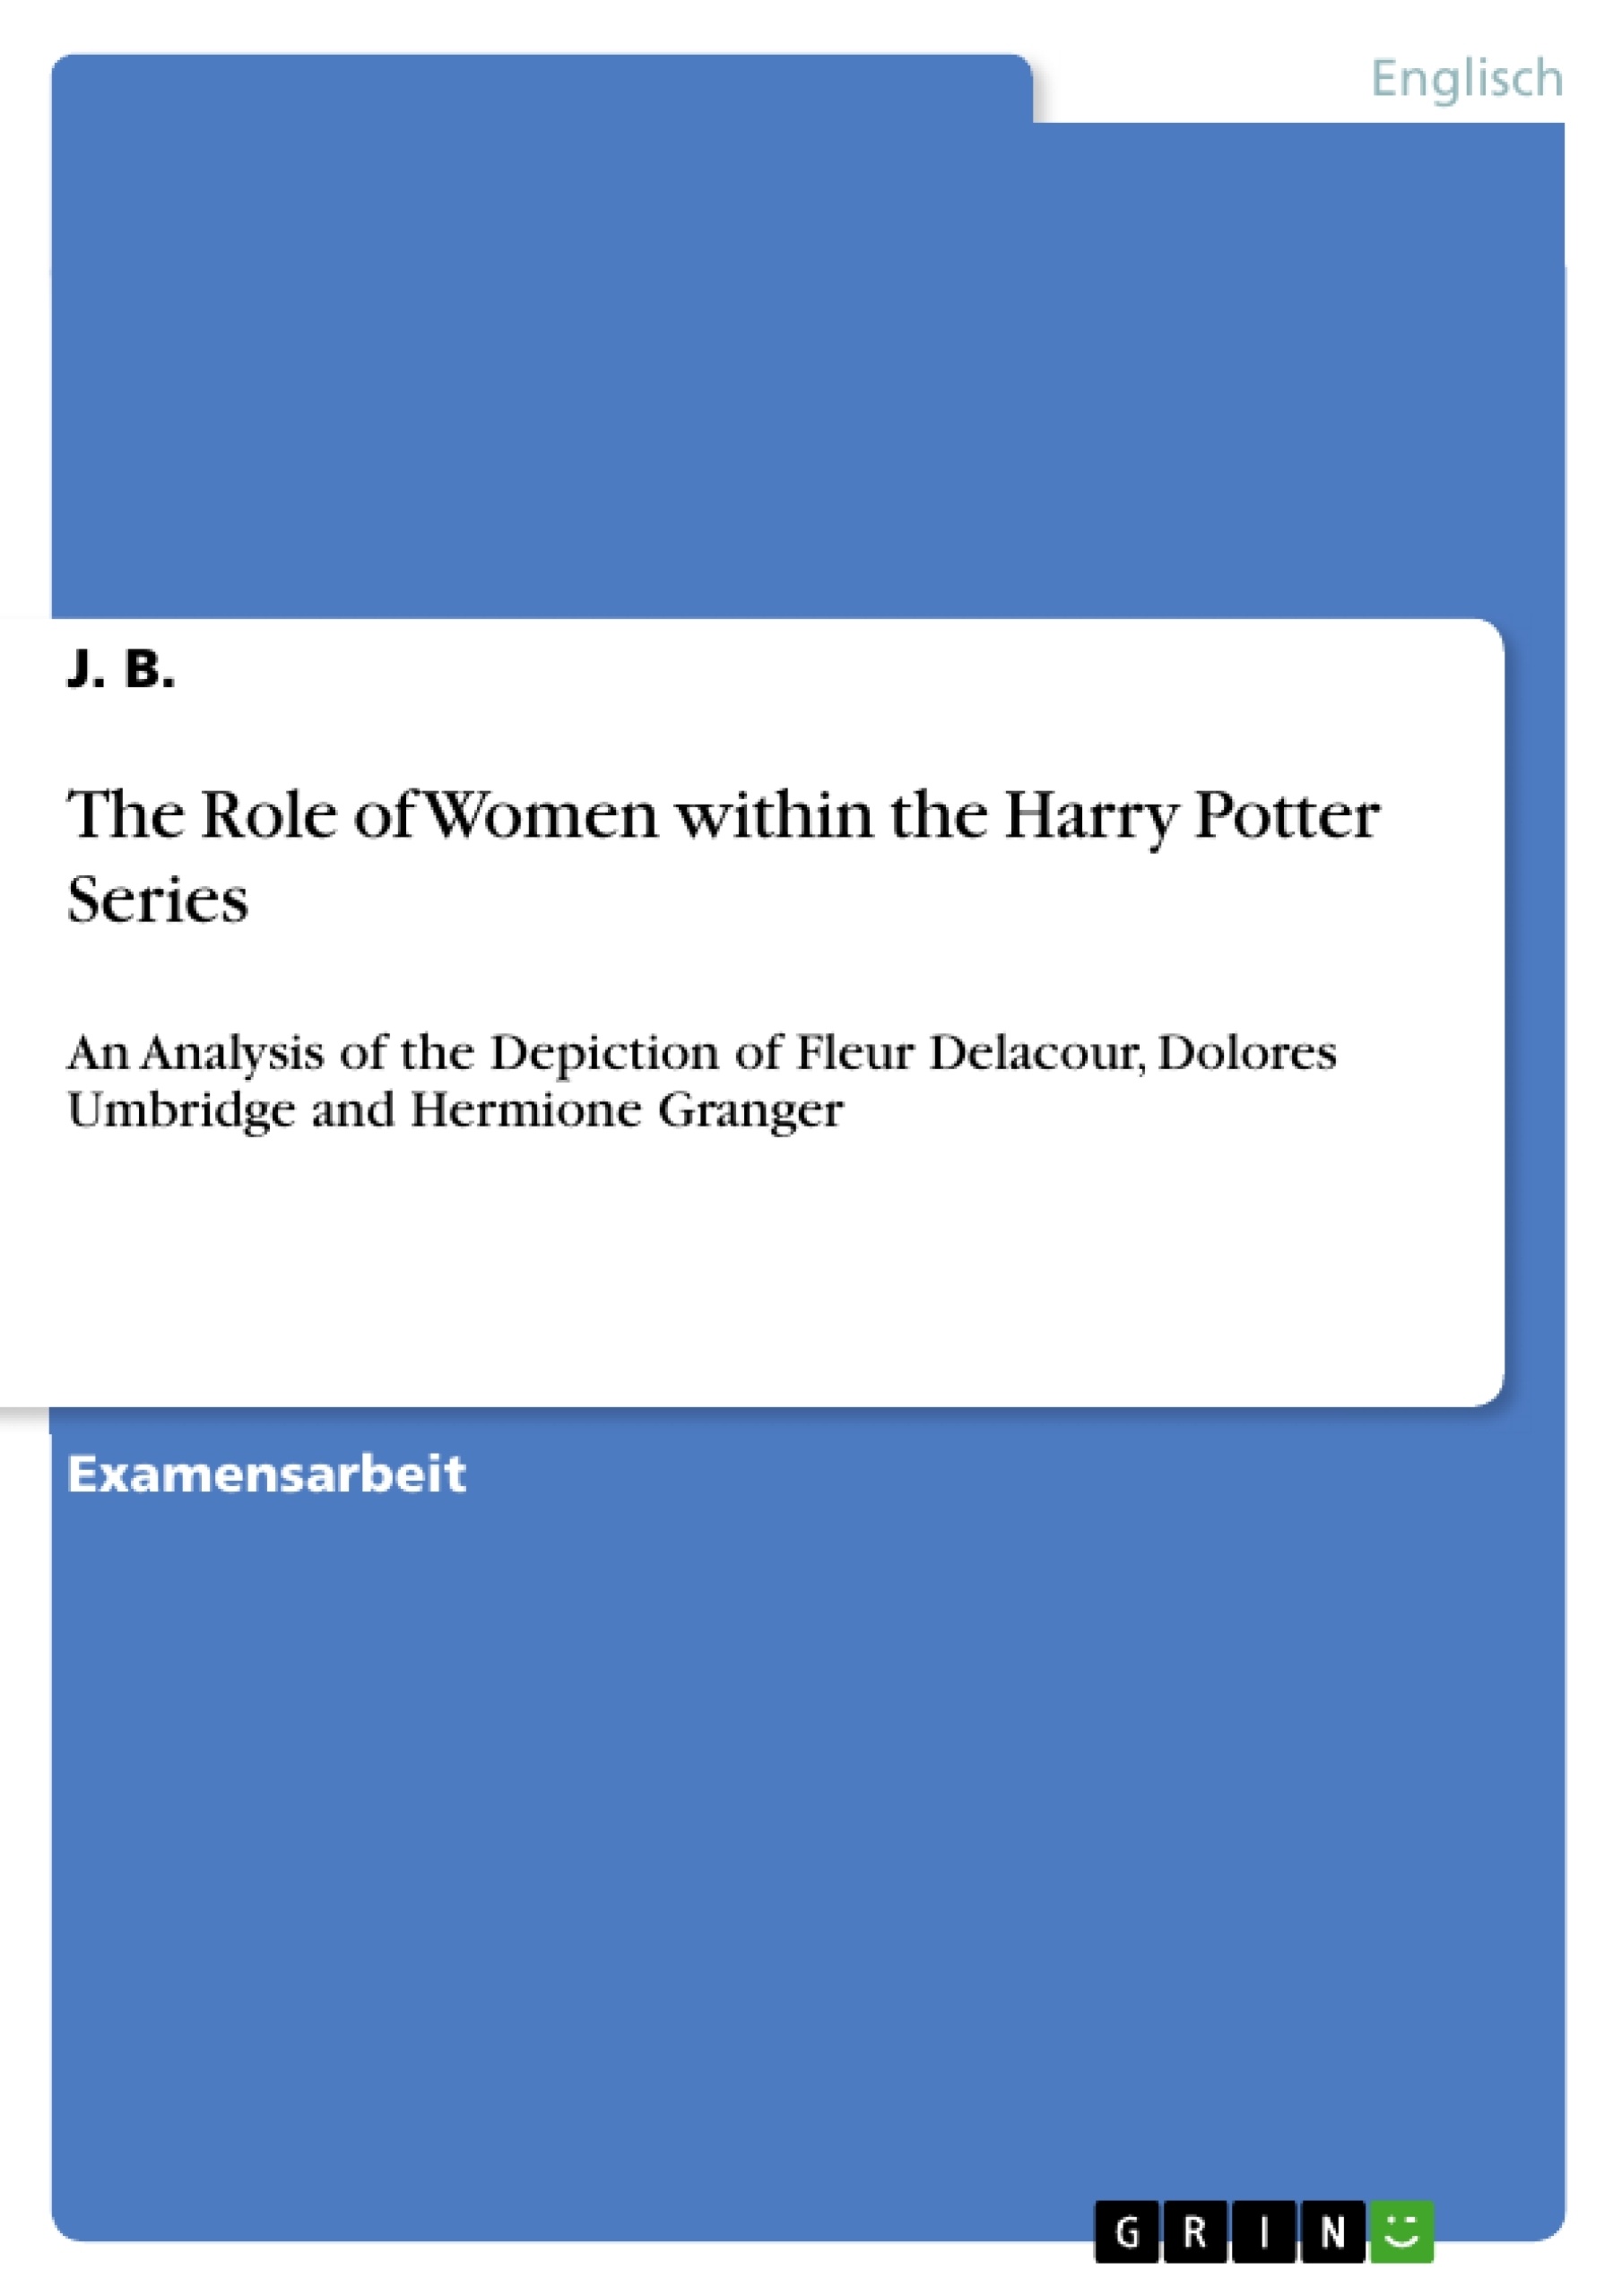 Titre: The Role of Women within the Harry Potter Series